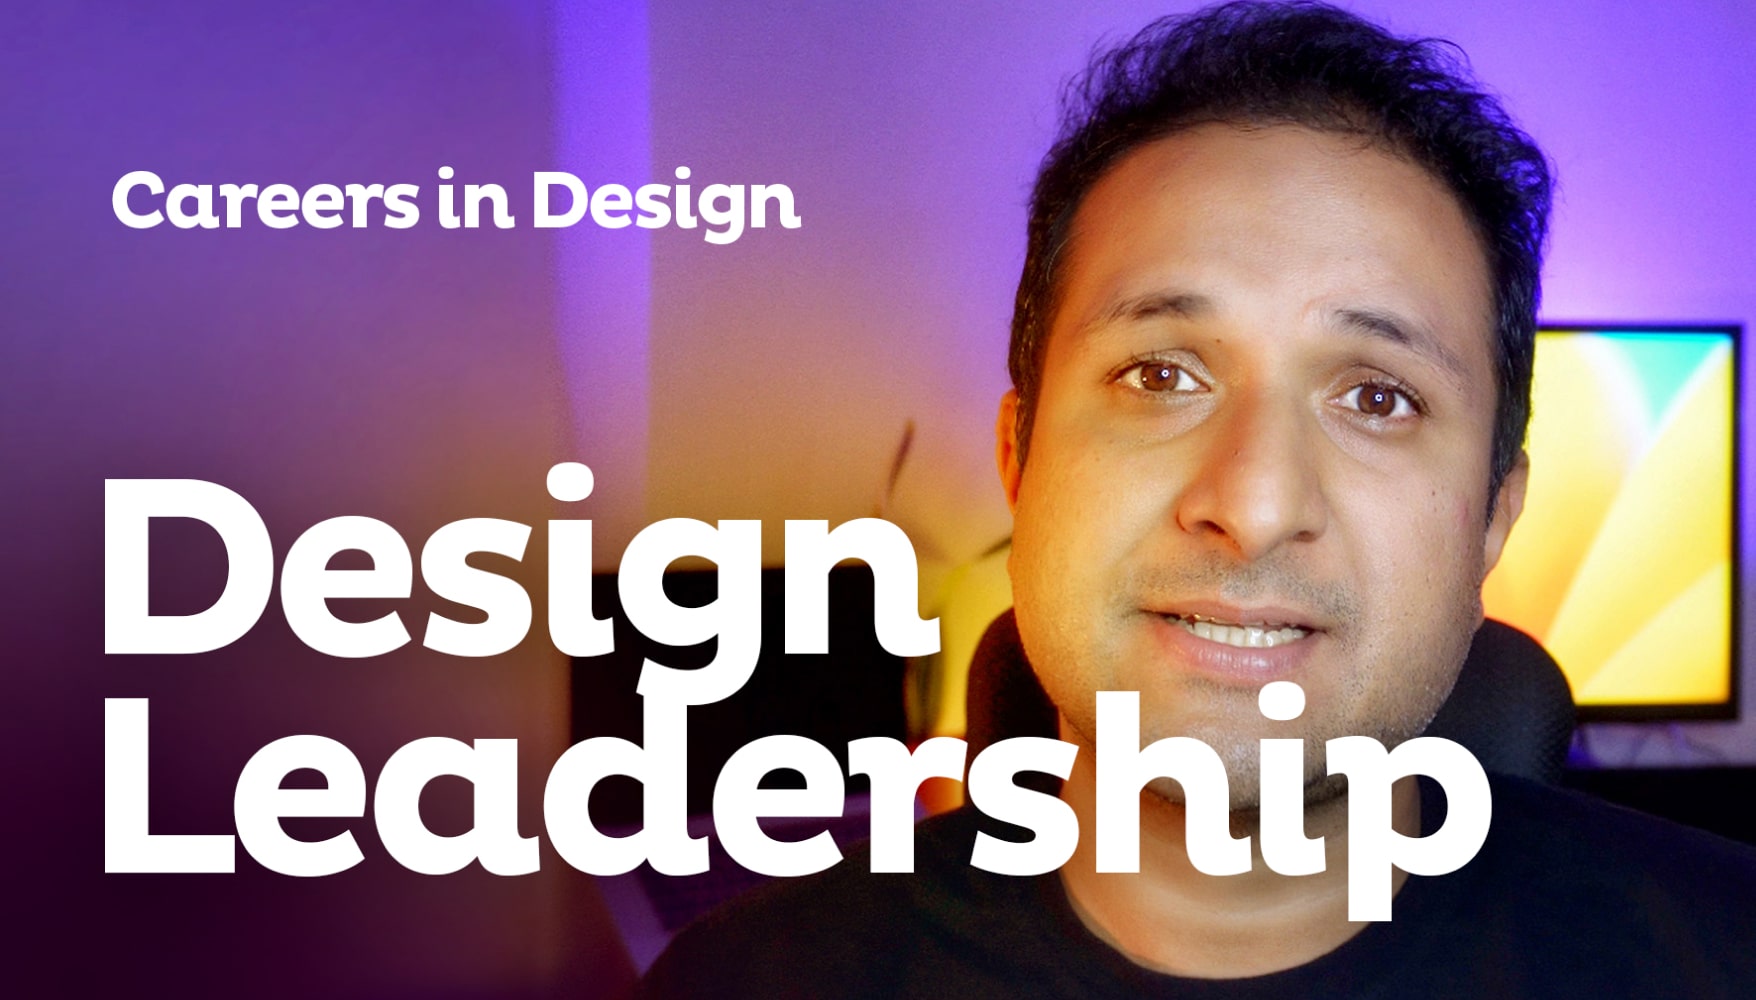 A screenshot from the Design Leadership Youtube video